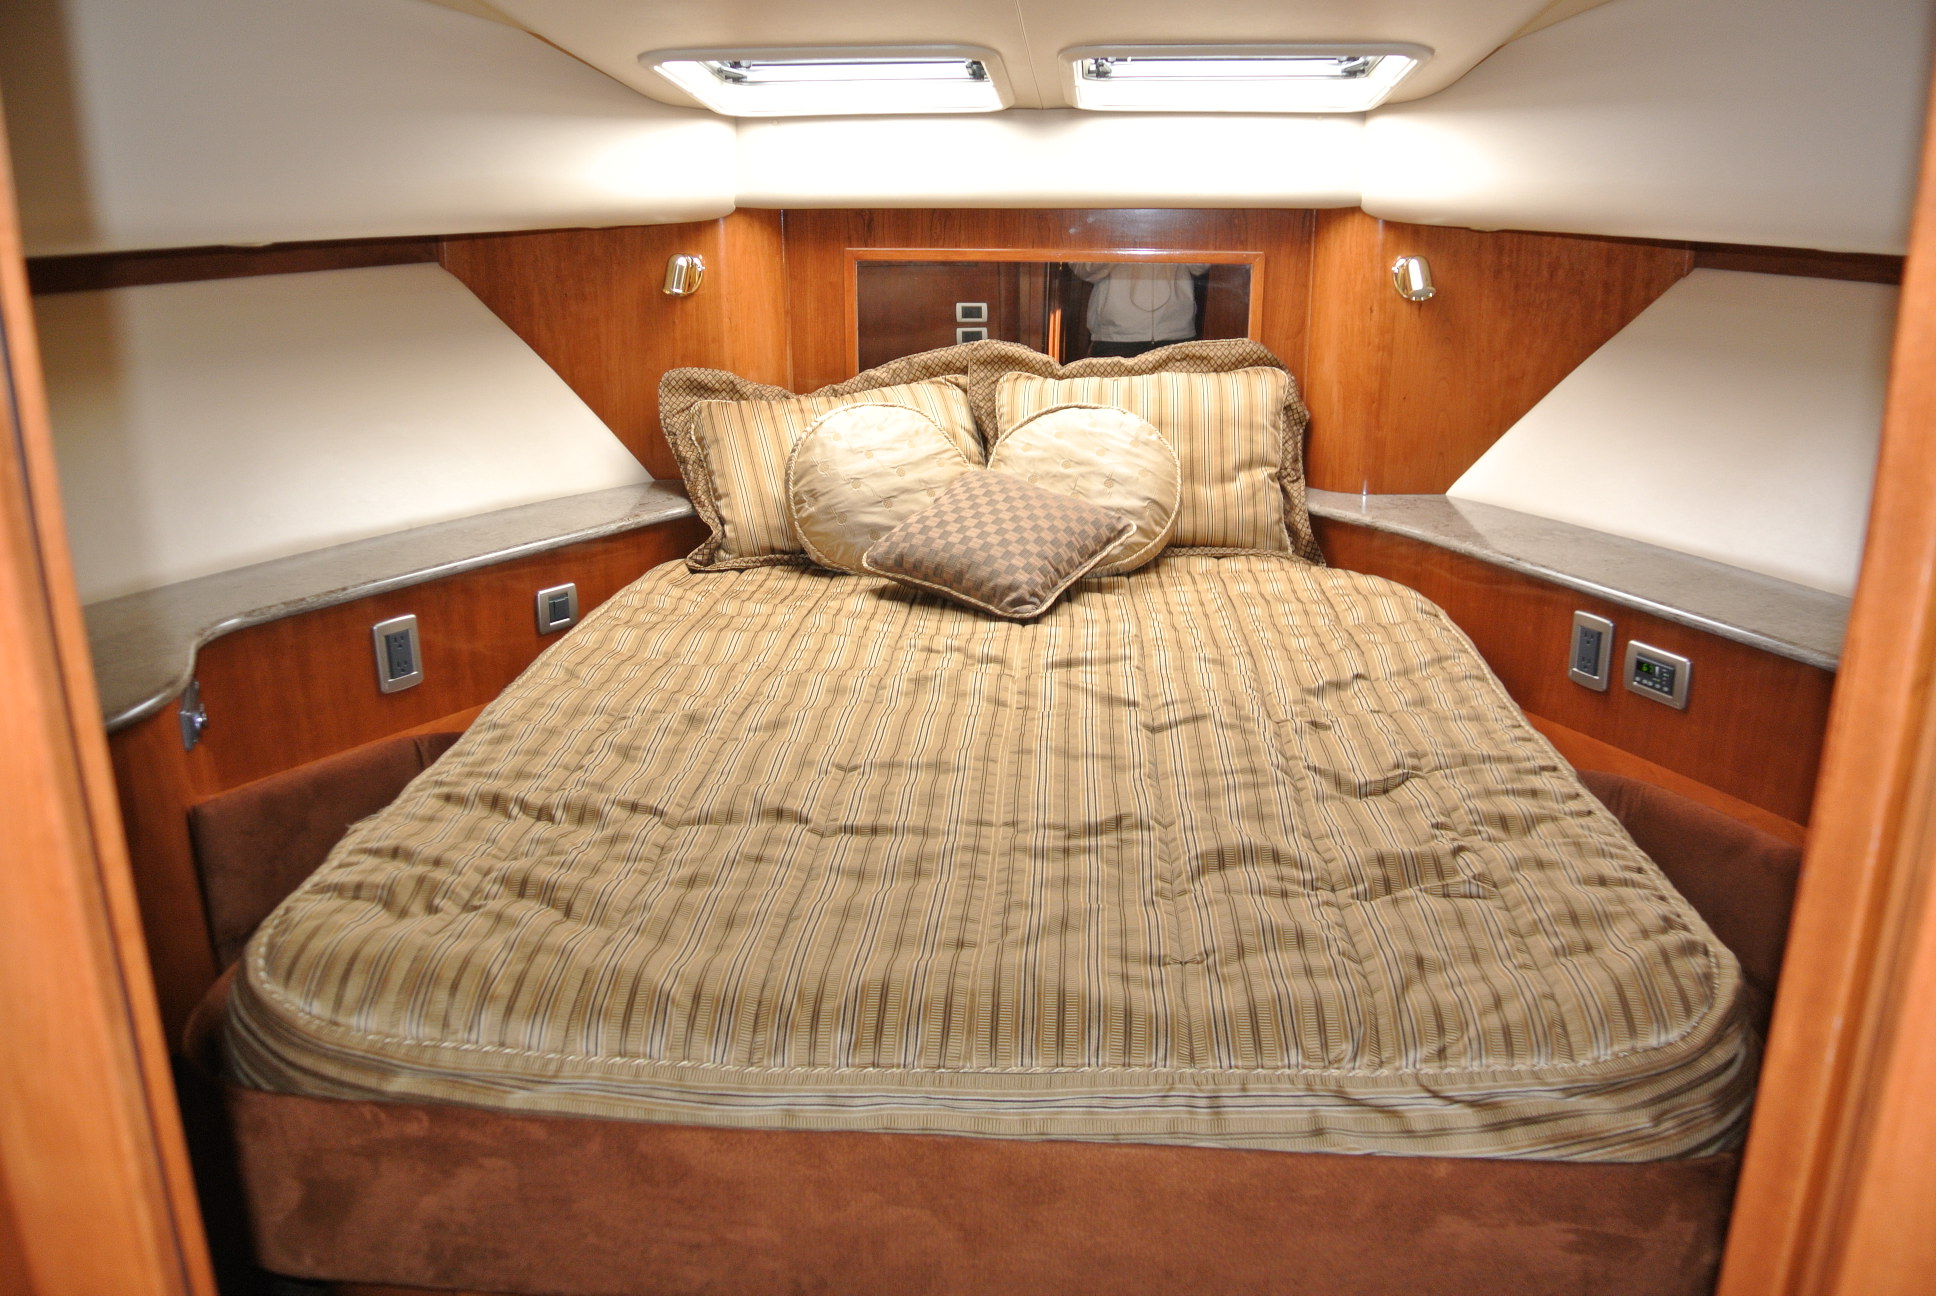 The VIP stateroom forward.